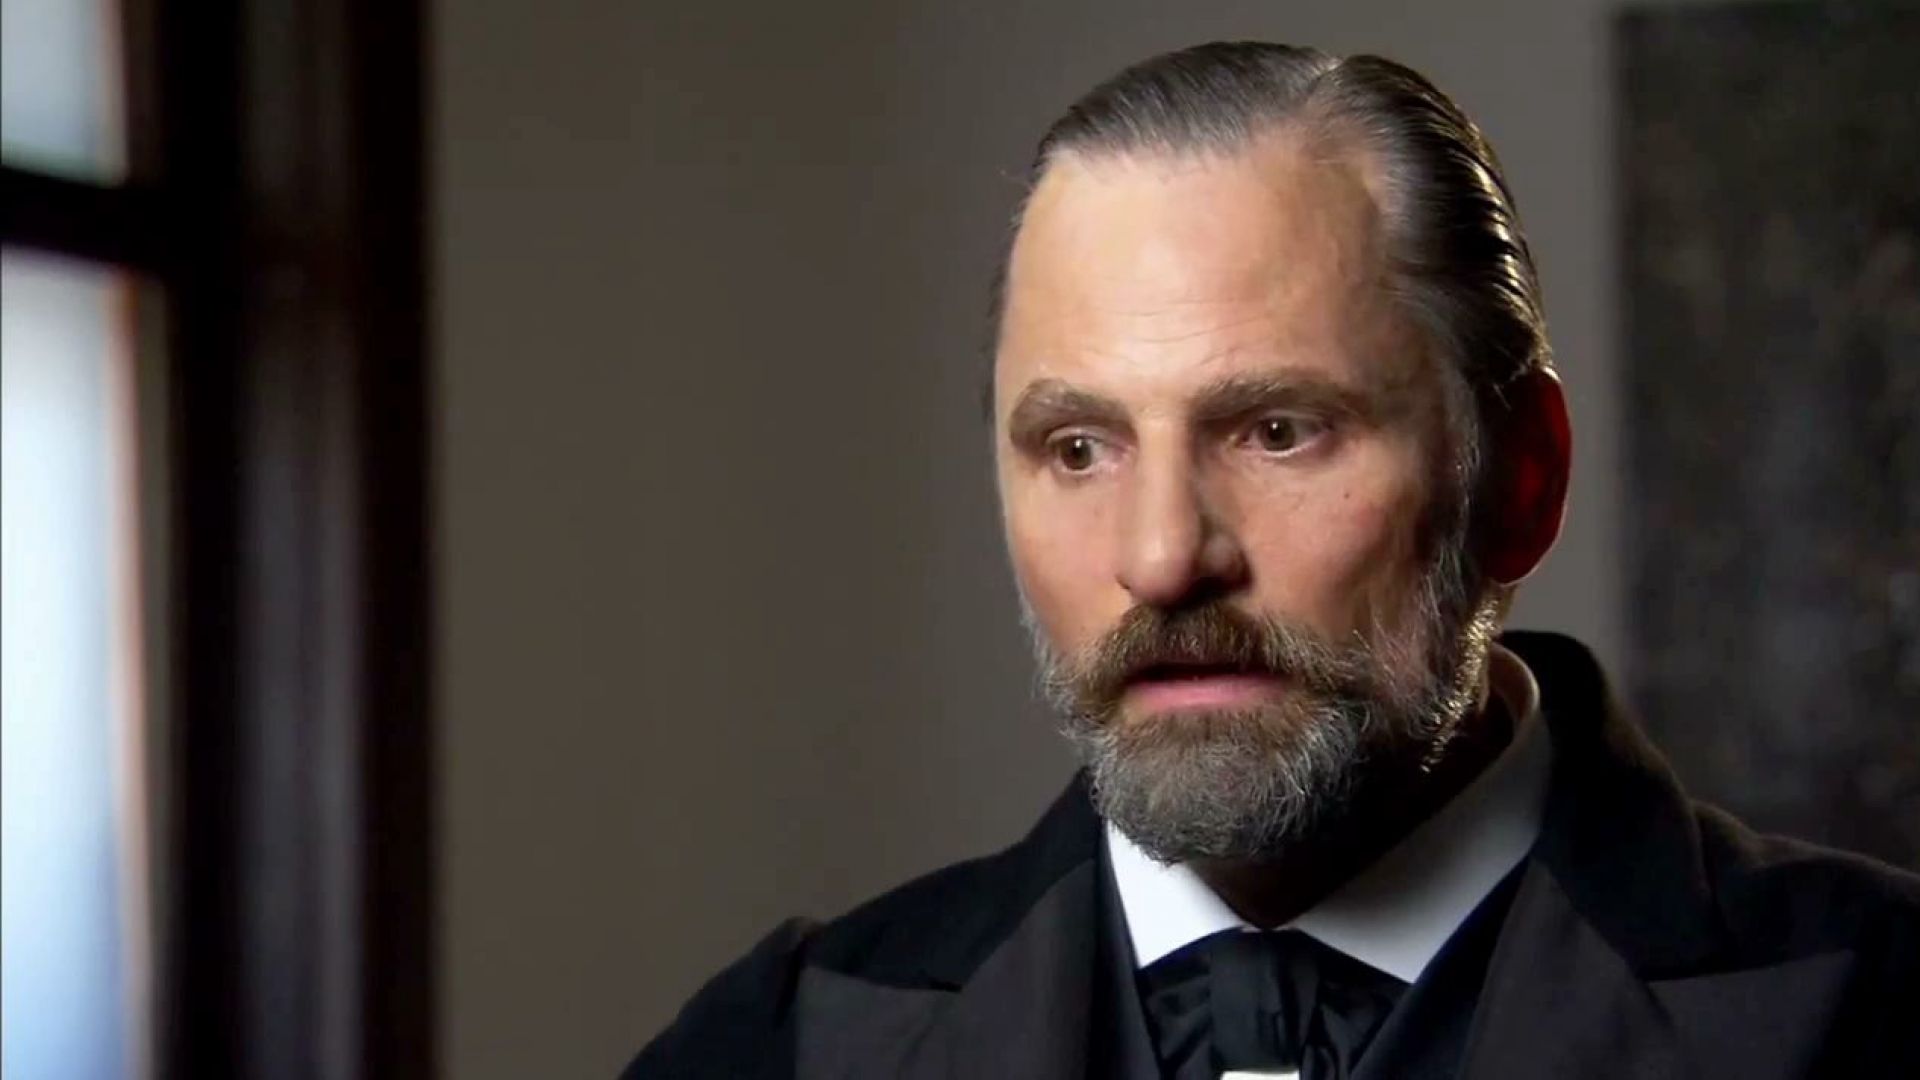 Viggo Mortensen on working with Michael Fassbender and Keira Knightley in A Dangerous Method